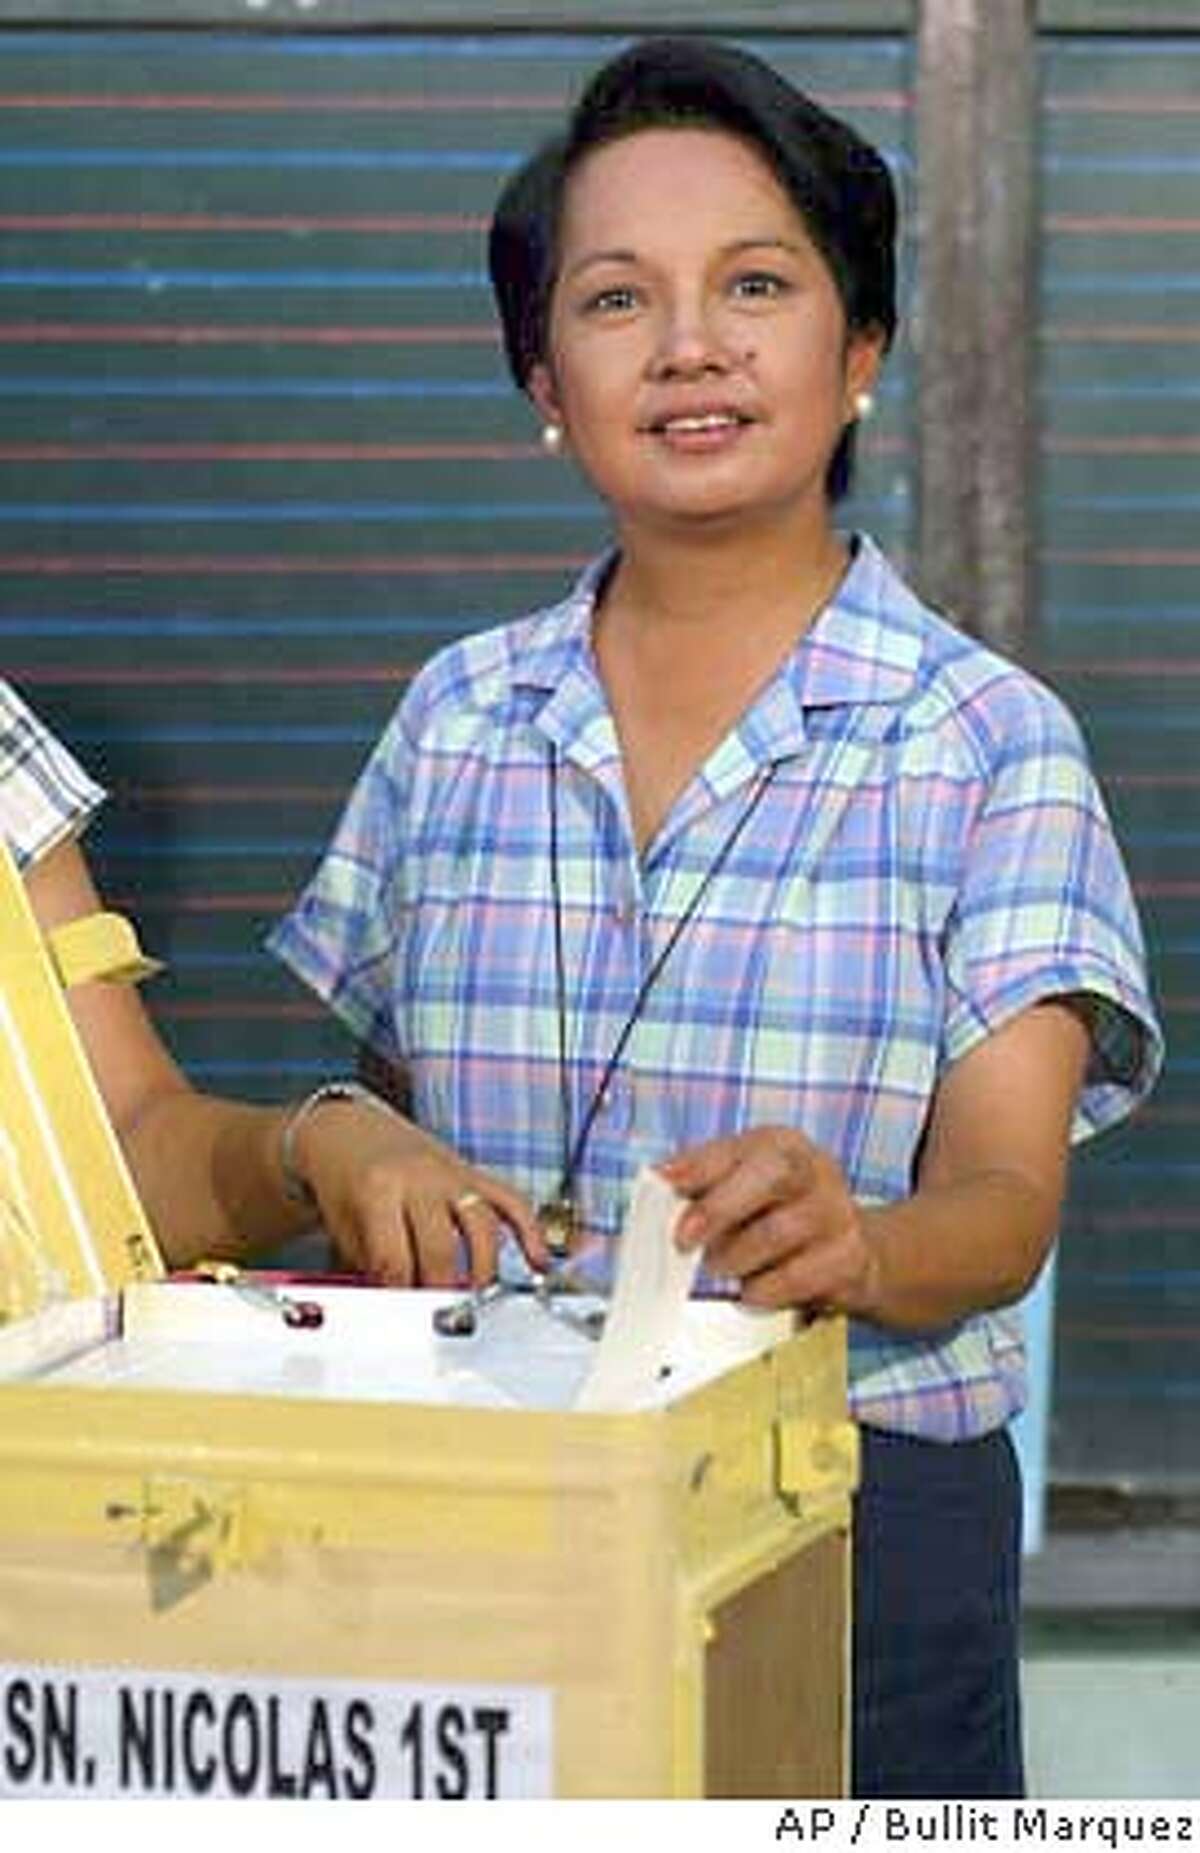 Philippine President Gloria Macapagal Arroyo casts her ballot at her hometown of Lubao in Pampanga province in northern Philippines, Monday May 10, 2004. Filipinos vote for their next president amid high security and scattered reports of violence in a race pitting incumbent Arroyo who strongly backs the U.S. war on terror against Fernando Poe, Jr., a film star, whose best friend, former President Joseph Estrada, lost the job in disgrace three years ago. (AP Photo/Bullit Marquez)